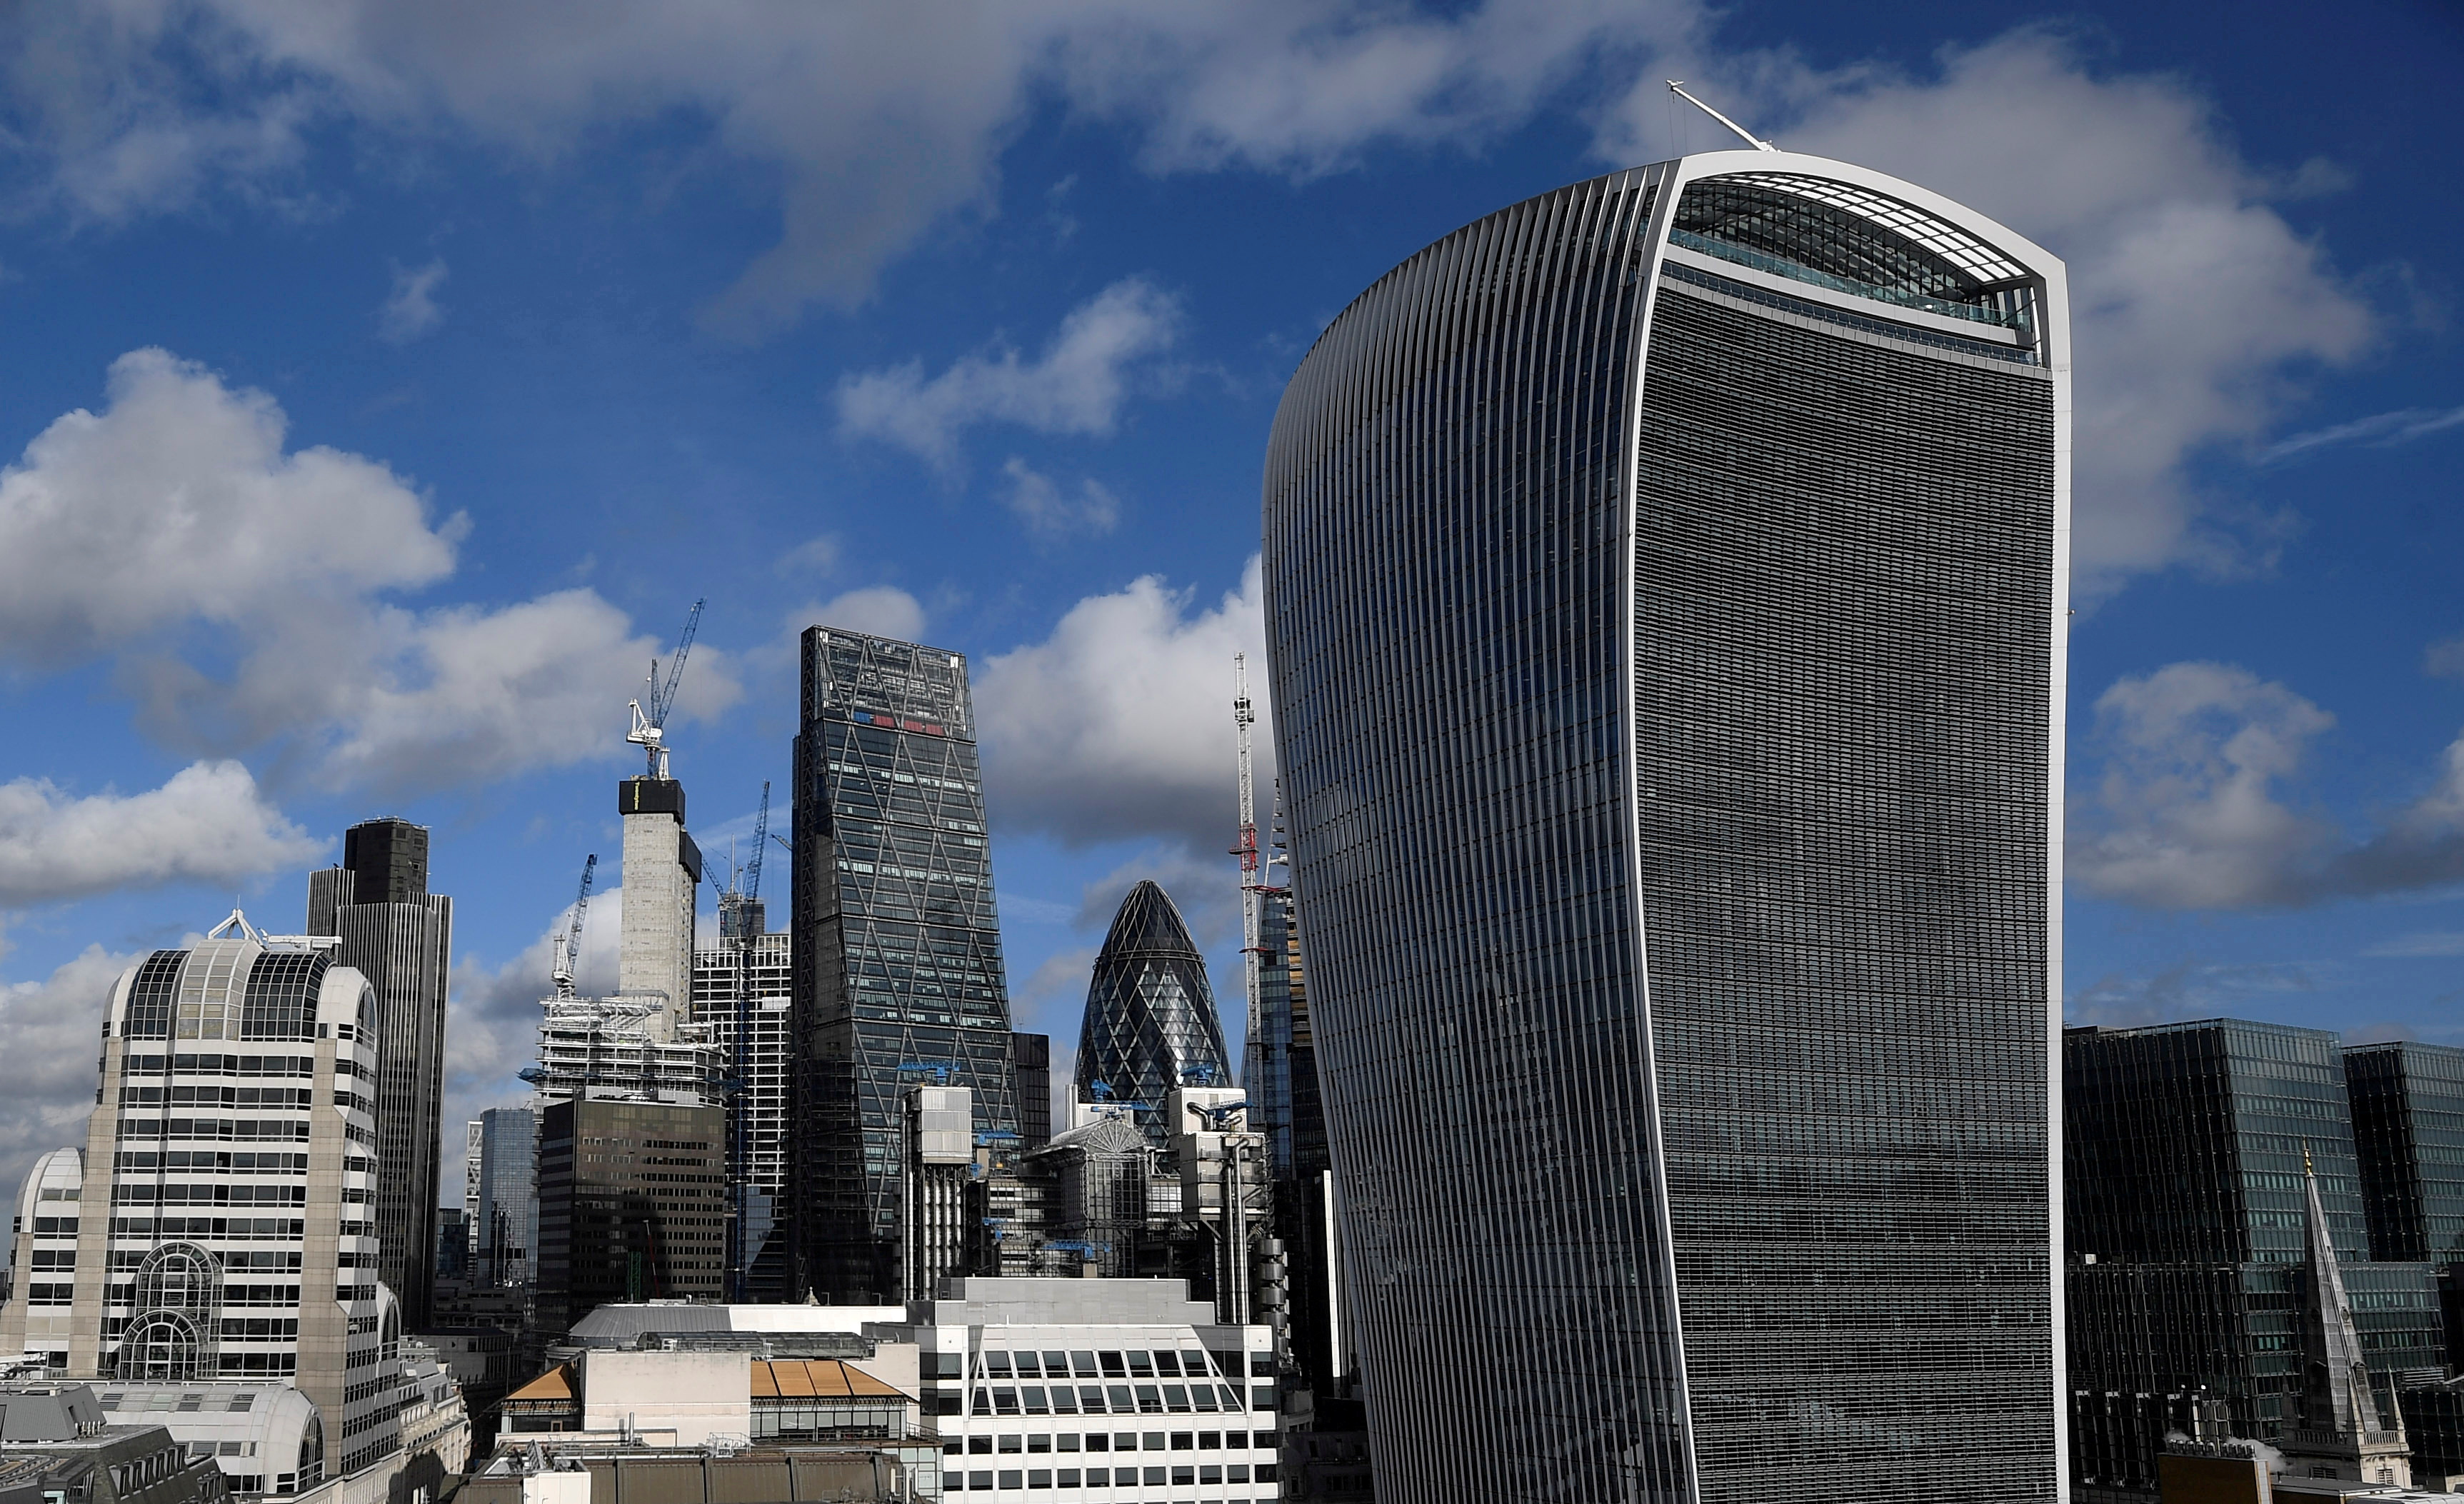 The City of London financial district is seen with office skyscrapers commonly known as 'Cheesegrater', 'Gherkin' and 'Walkie Talkie' seen in London, Britain